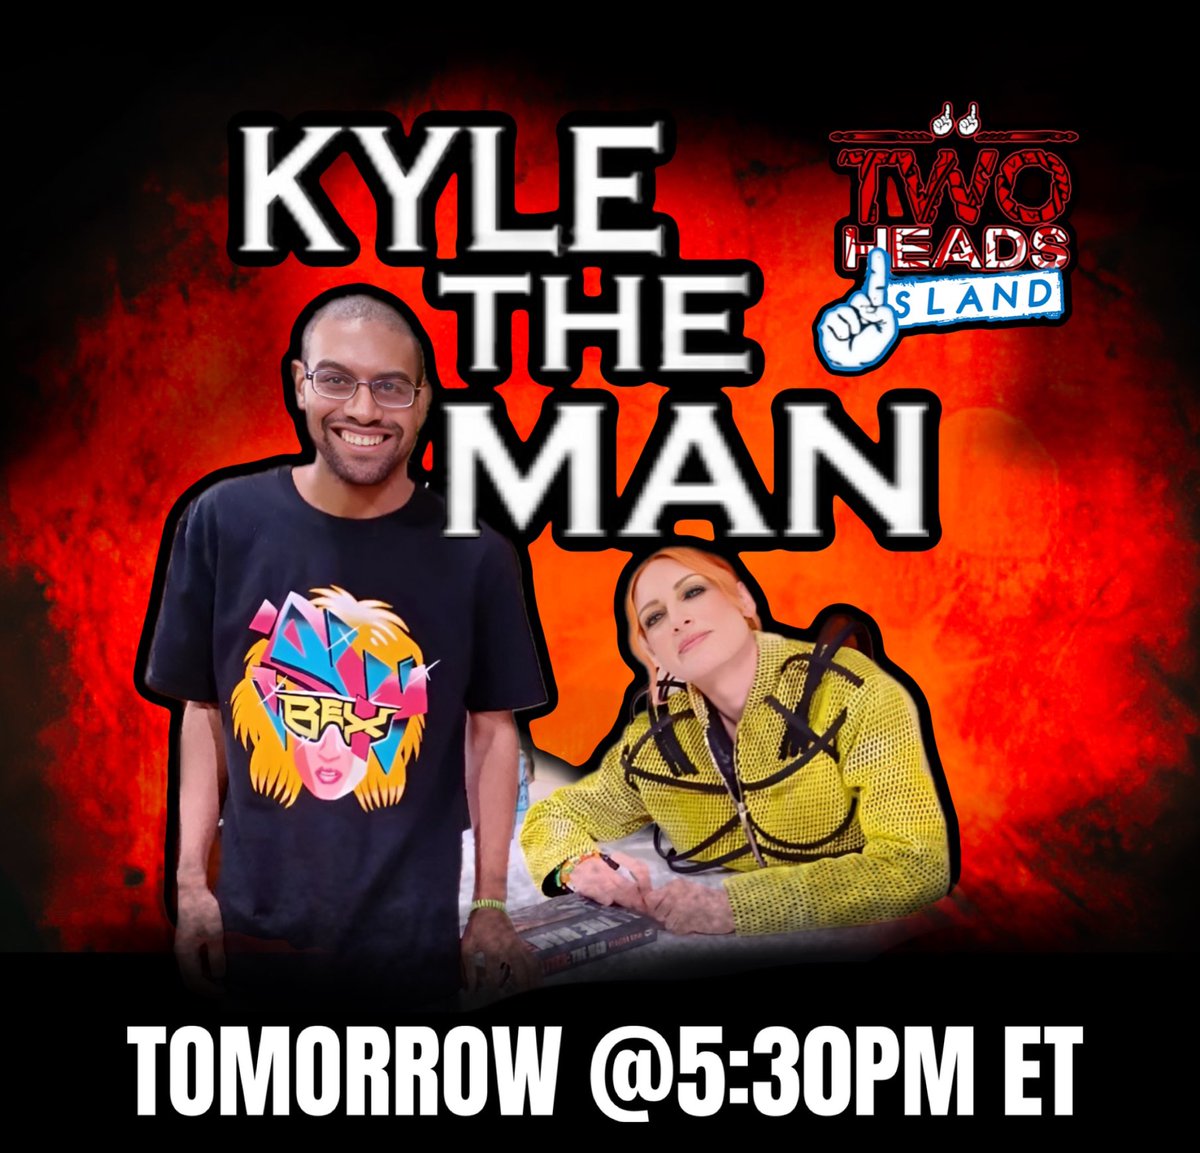 🚨OFFICIAL🚨 “Kyle The Man” Anthony will be YOUR host of tomorrow’s Monday Night RAW preview! See you at @TwoHeadsISLAND 🏝️